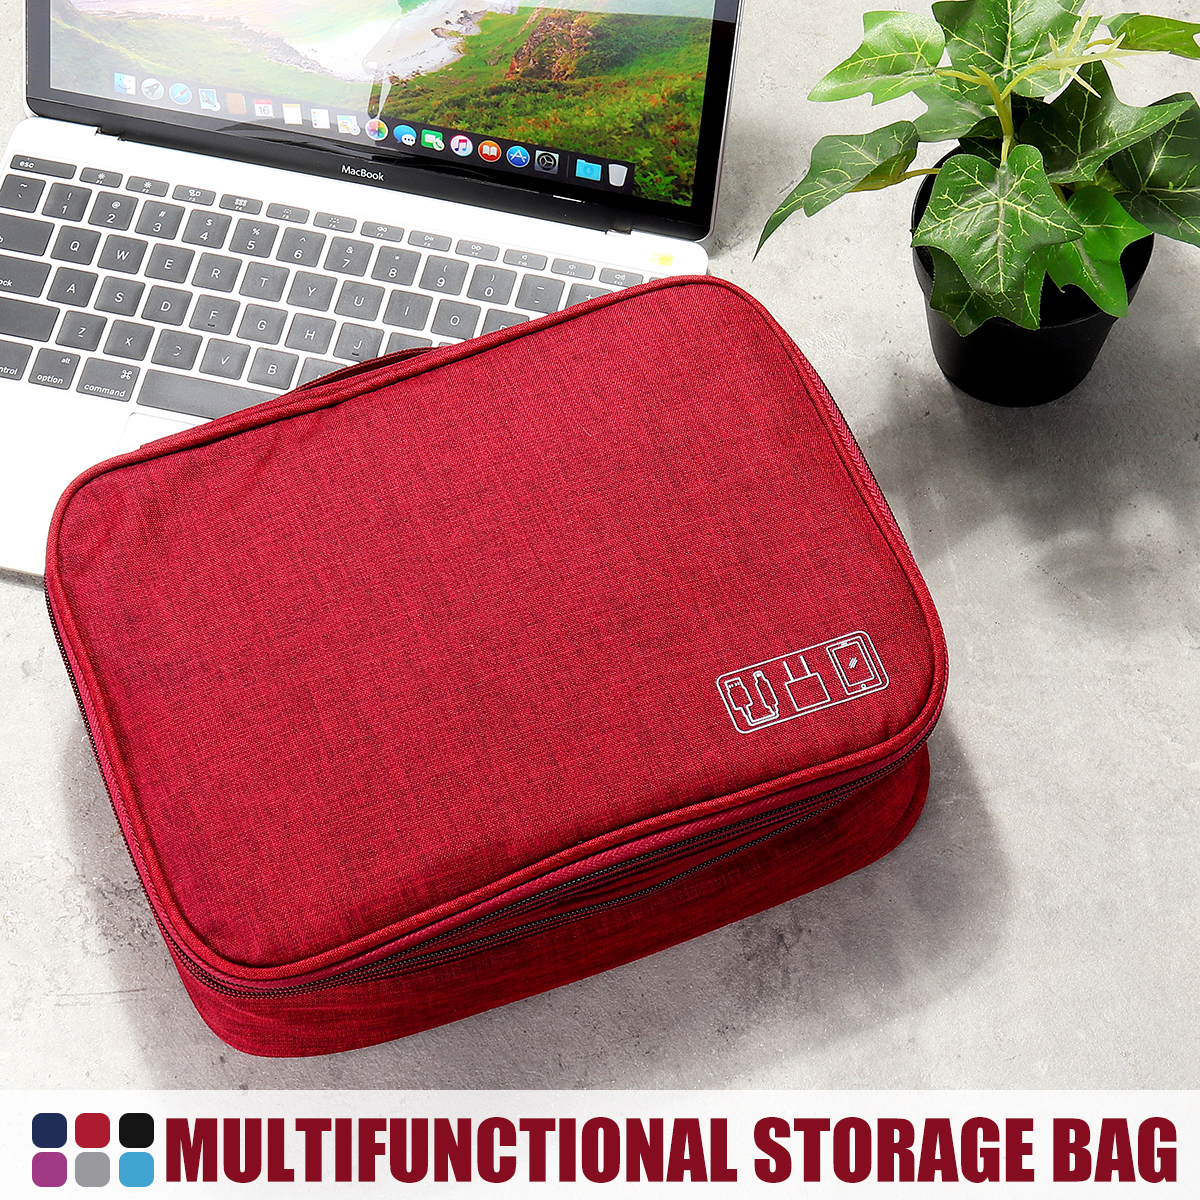 Data-Cable-Storage-Bag-Multifunctional-Digital-Devices-Stationery-Case-Portable-Travel-Electronic-Po-1782315-1